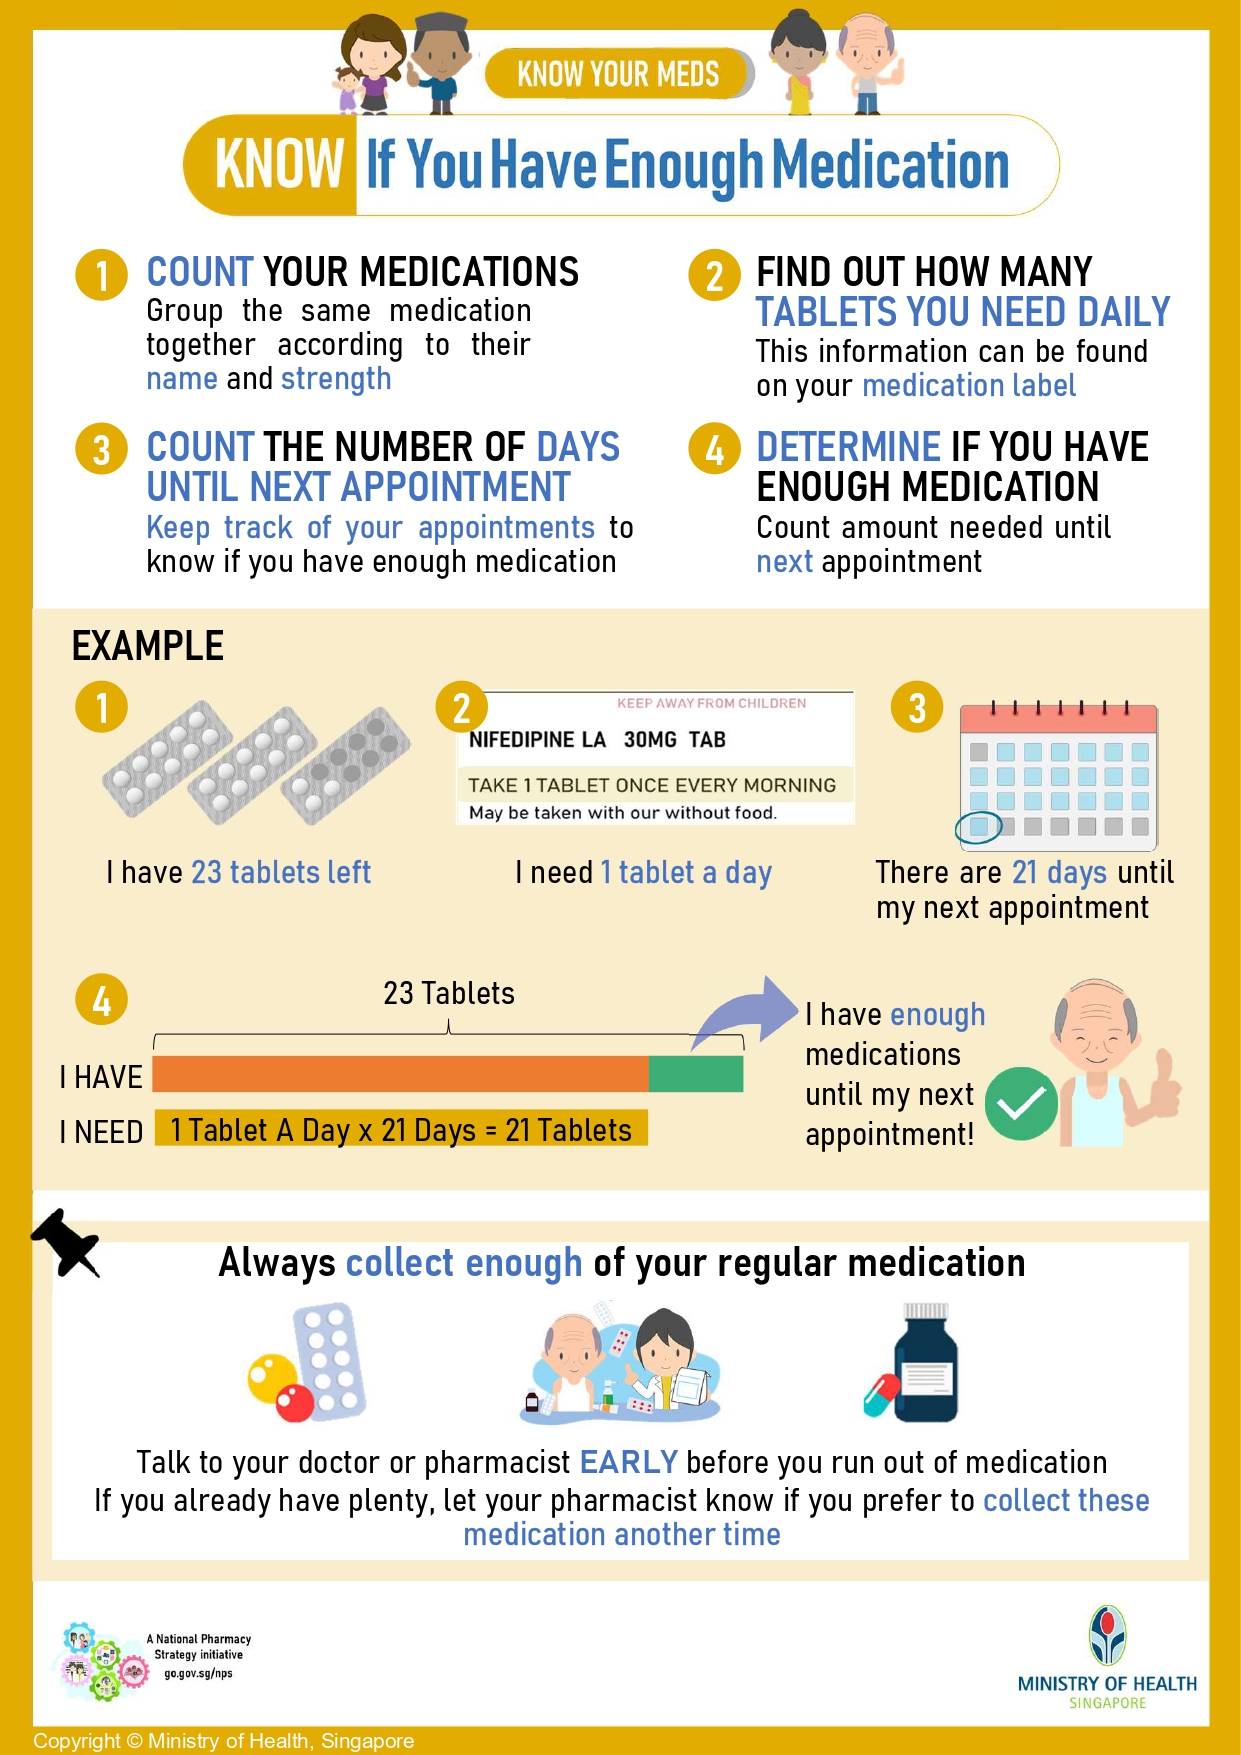 3. Know If You Have Enough Medications